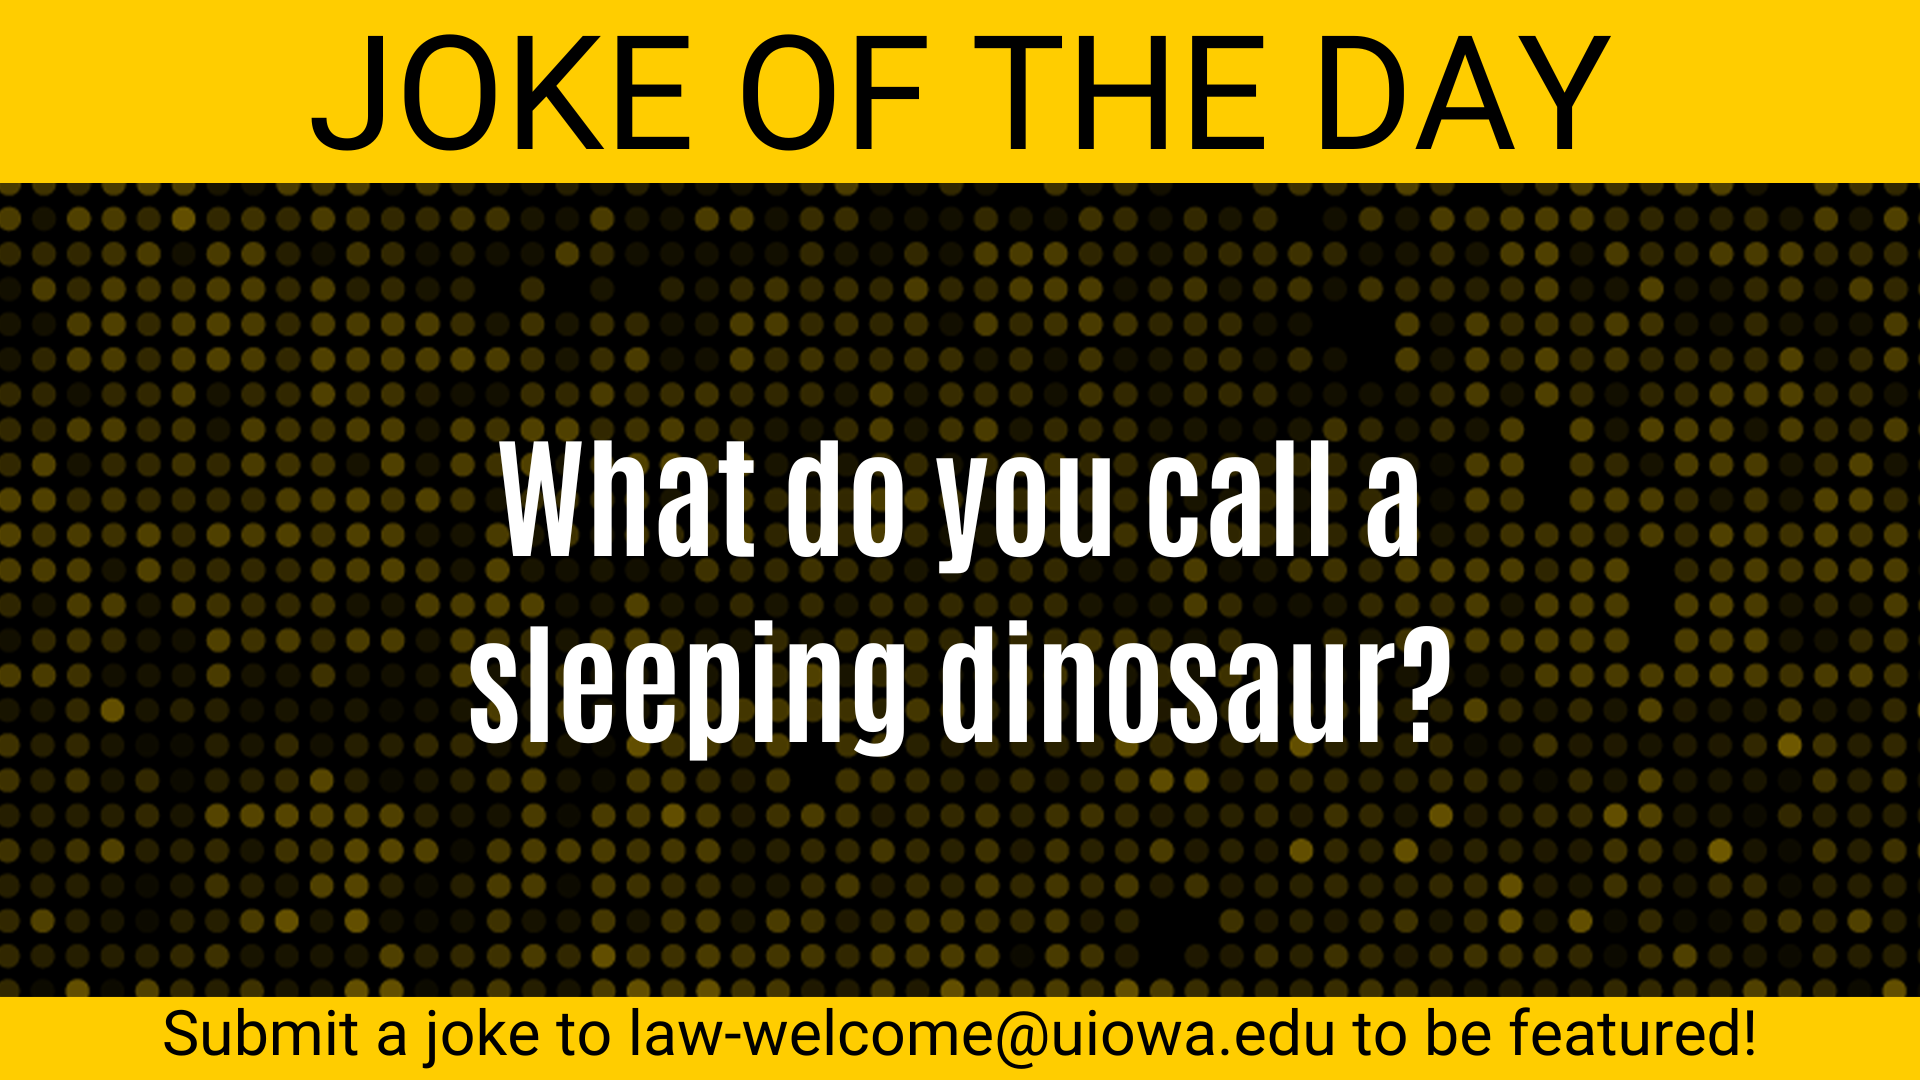 Joke of the Day: What do you call a sleeping dinosaur? 